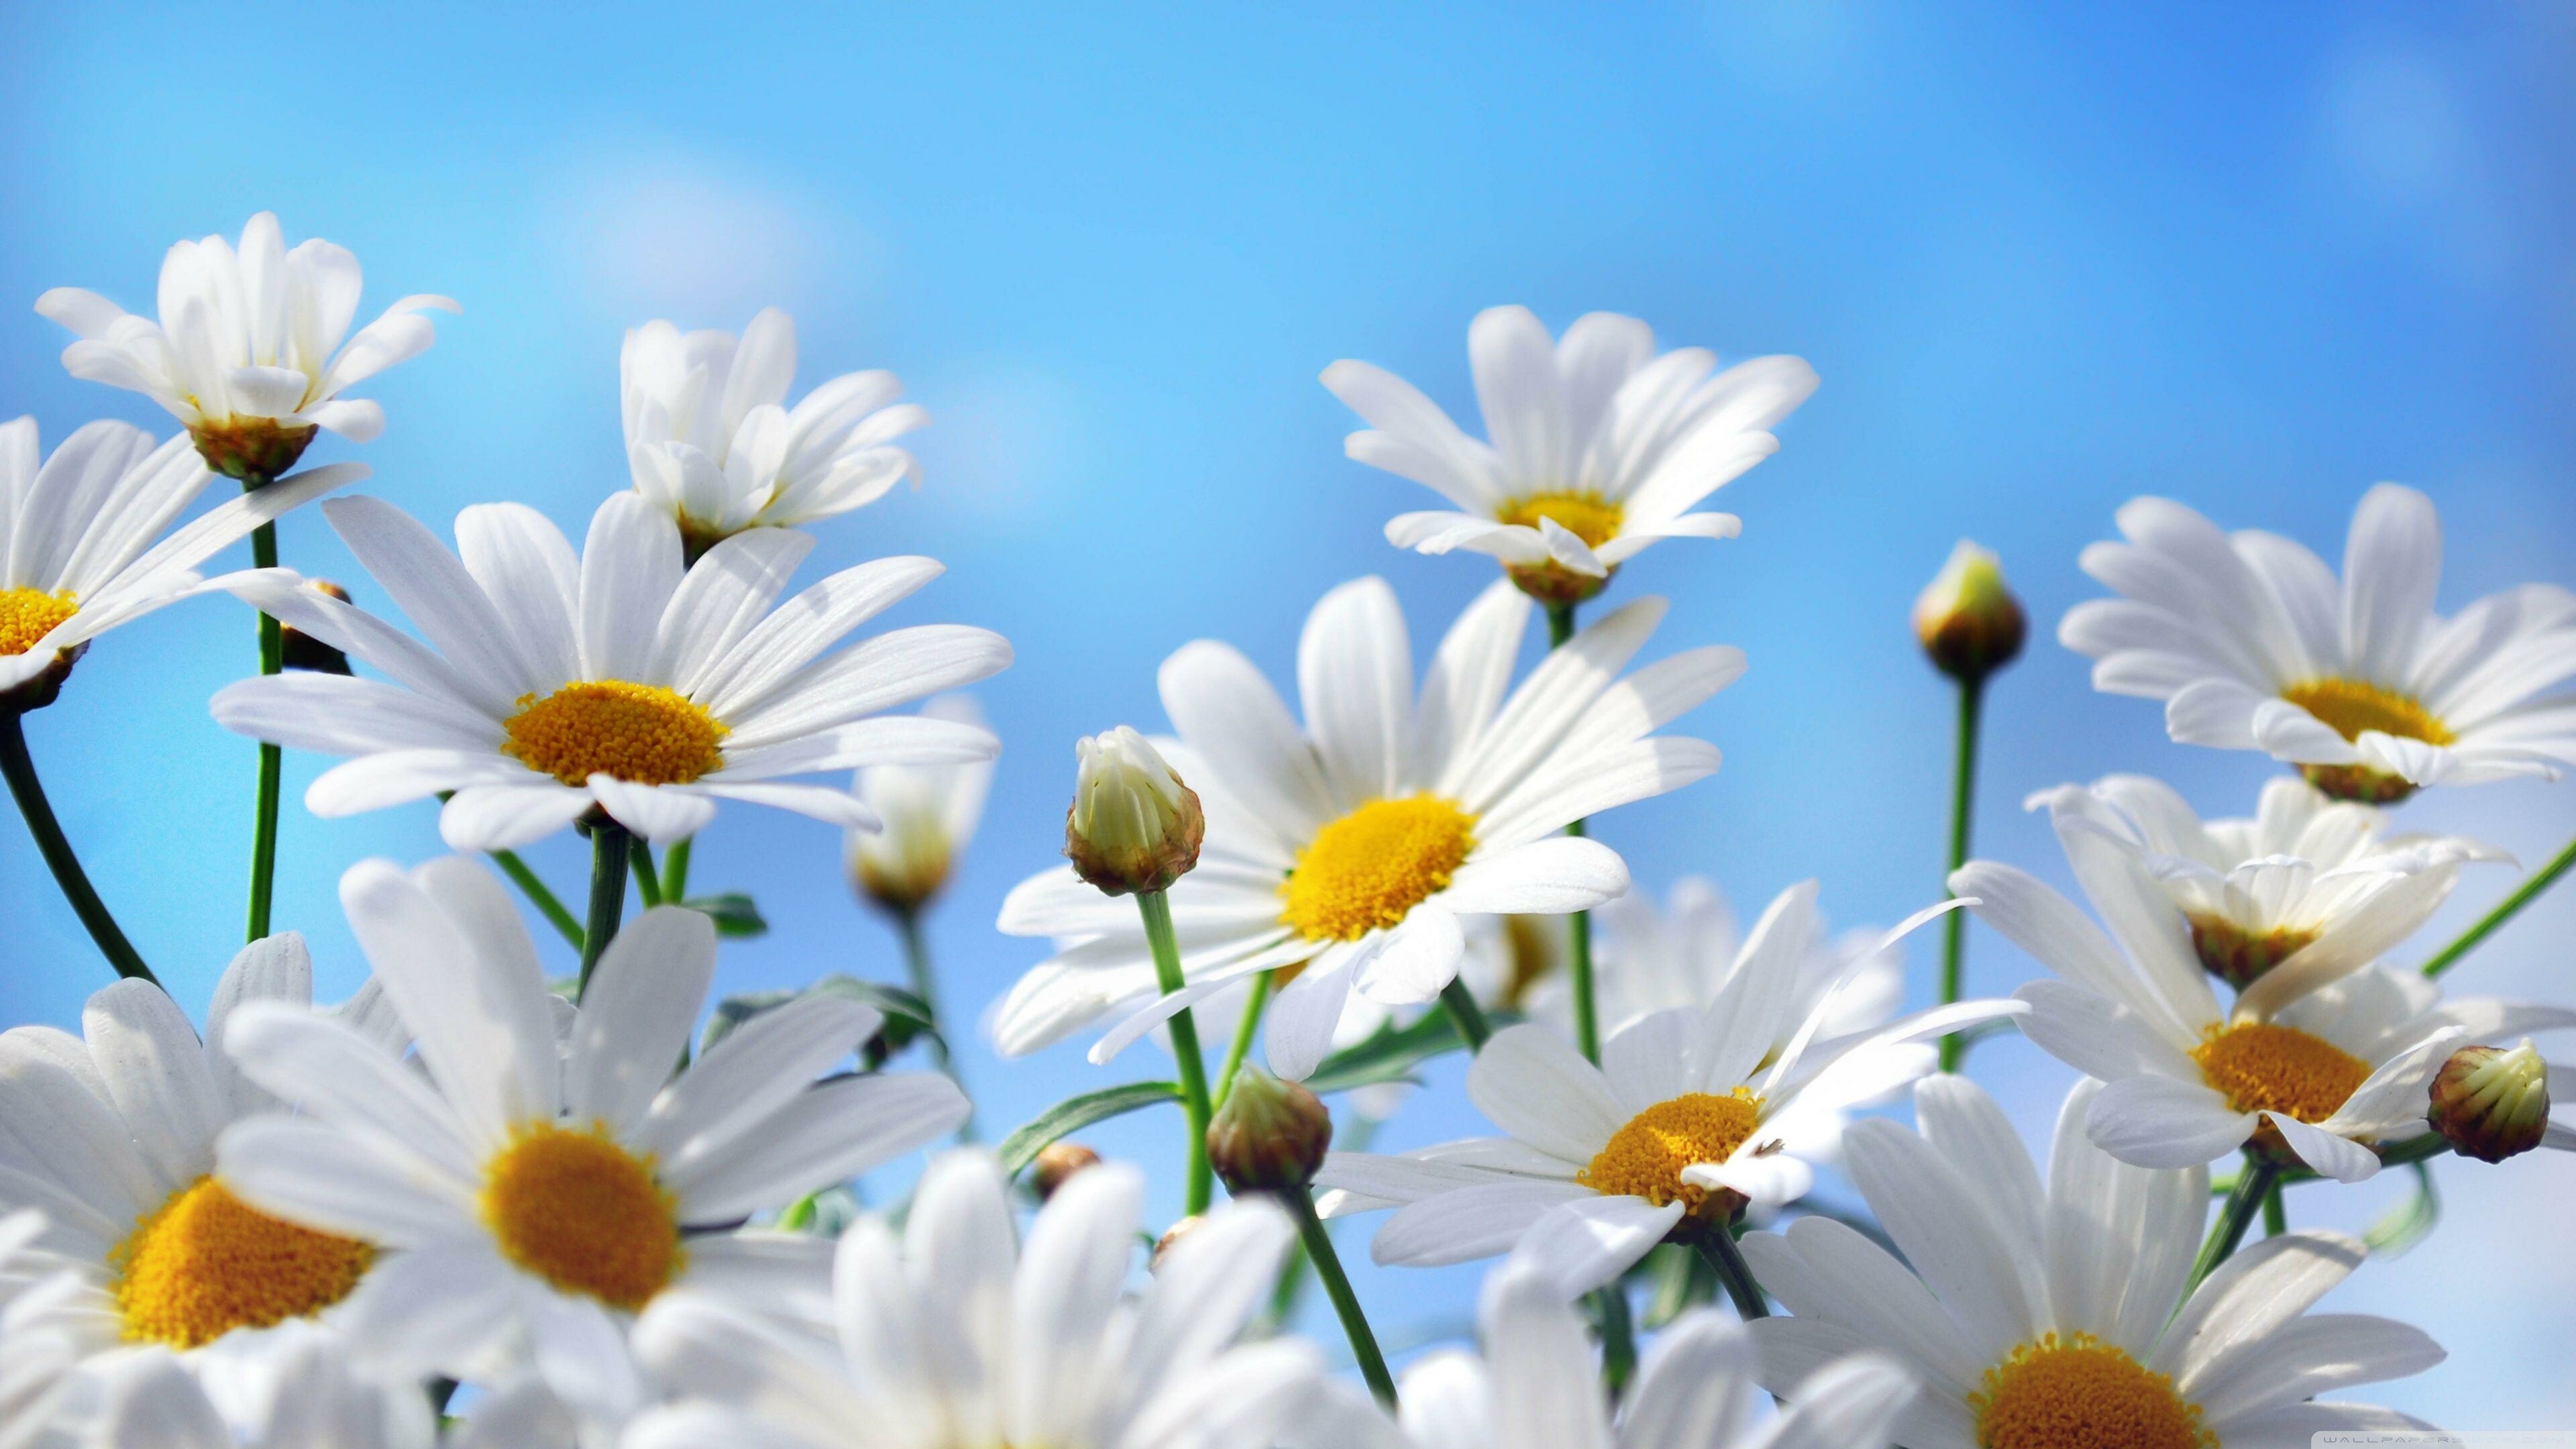 Daisy: A perennial herbaceous plant growing to 20 centimetres in height. 3840x2160 4K Wallpaper.